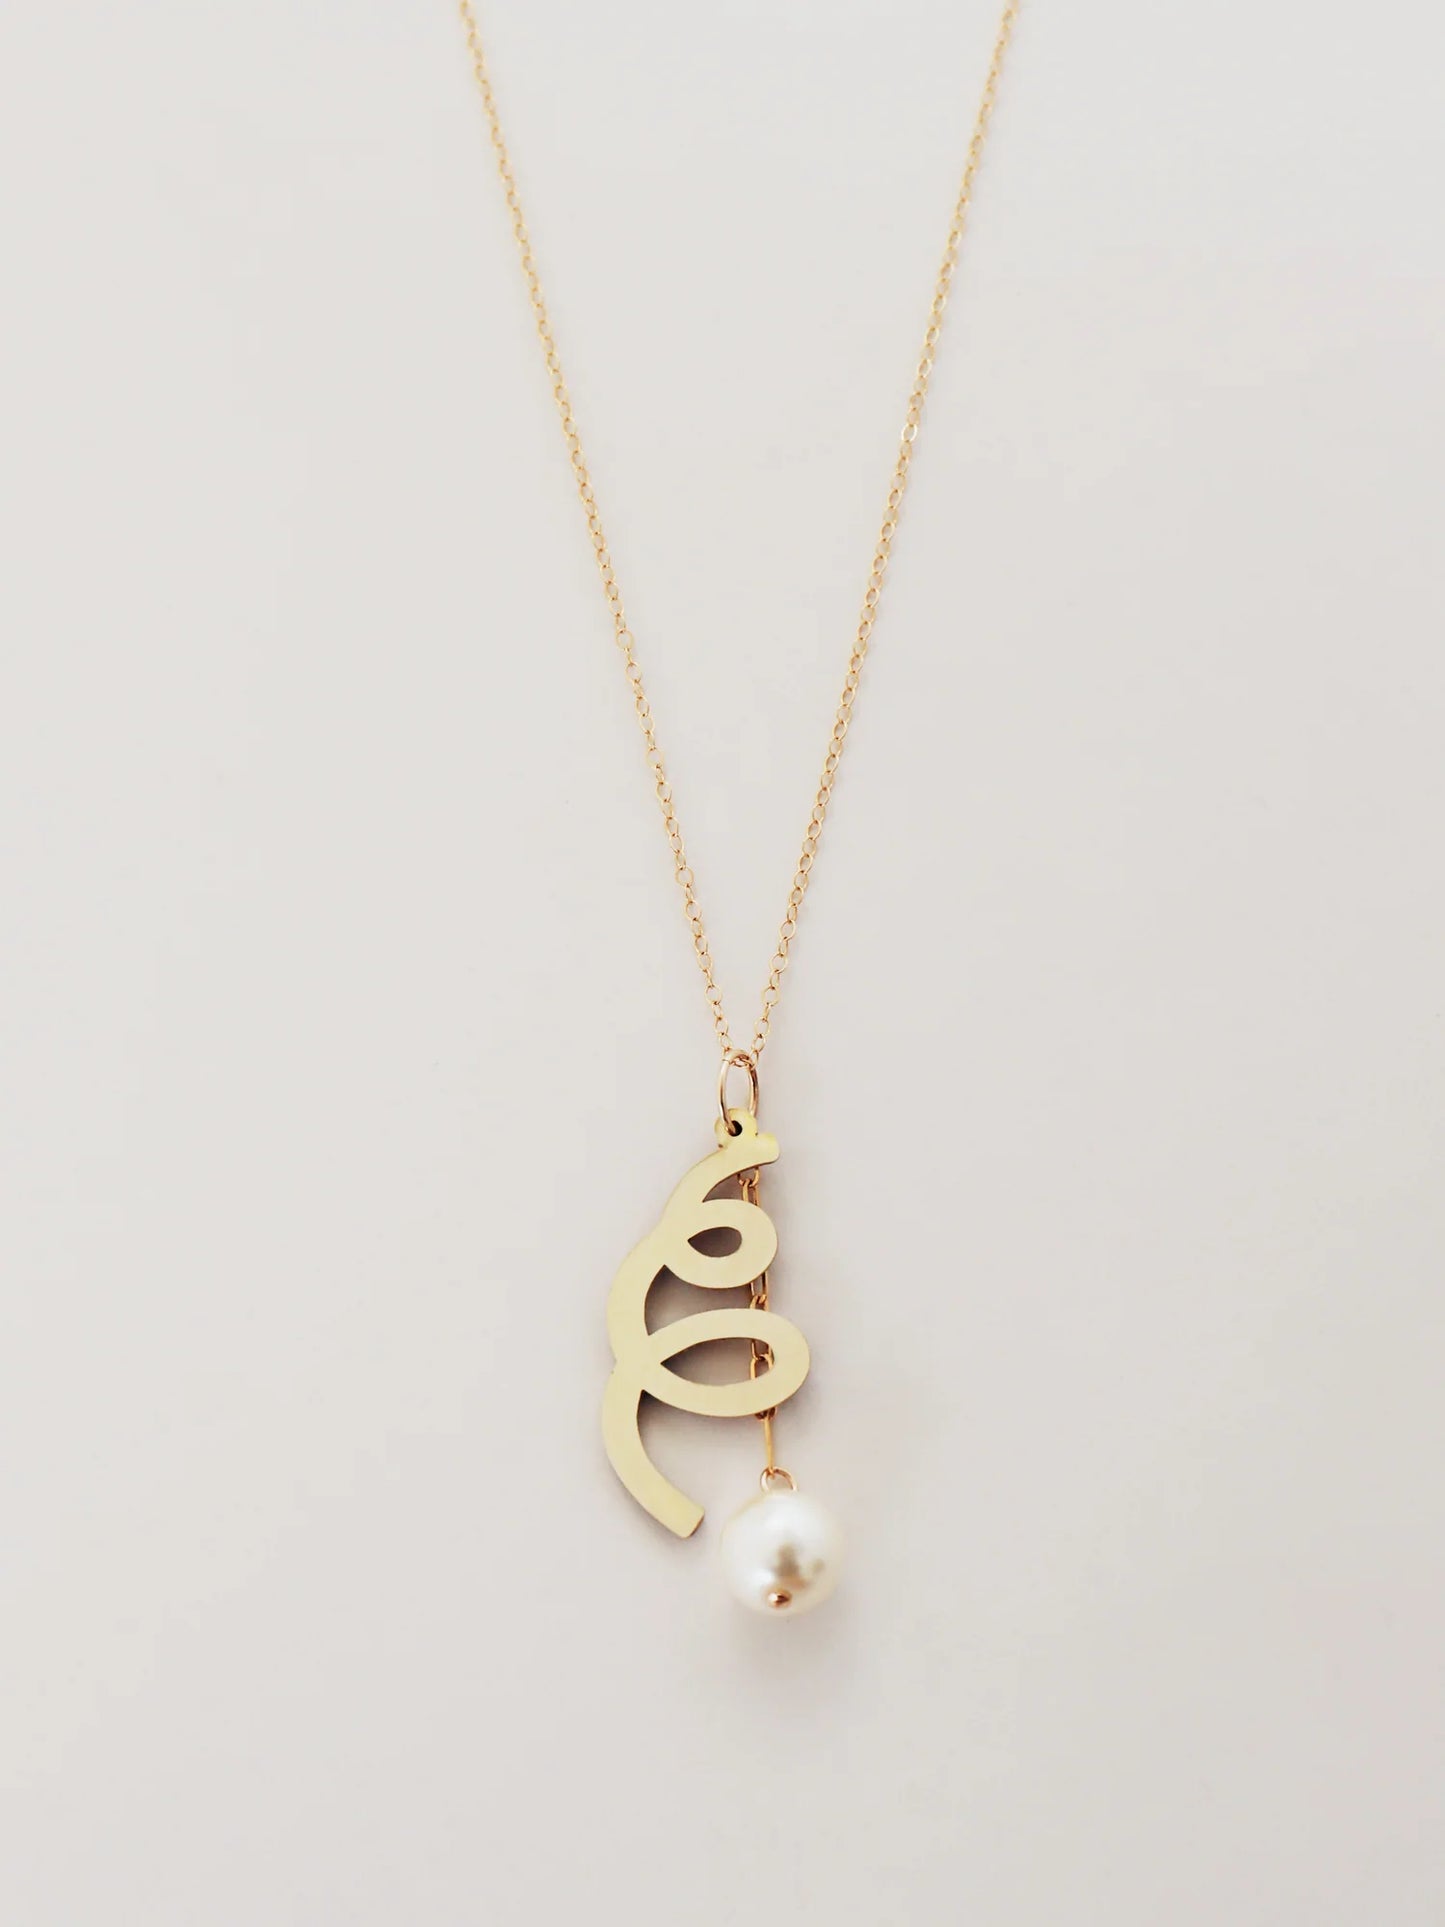 The Every Space Lola necklace with gold filled chain and brass & glass purl pendant by Wolf & Moon